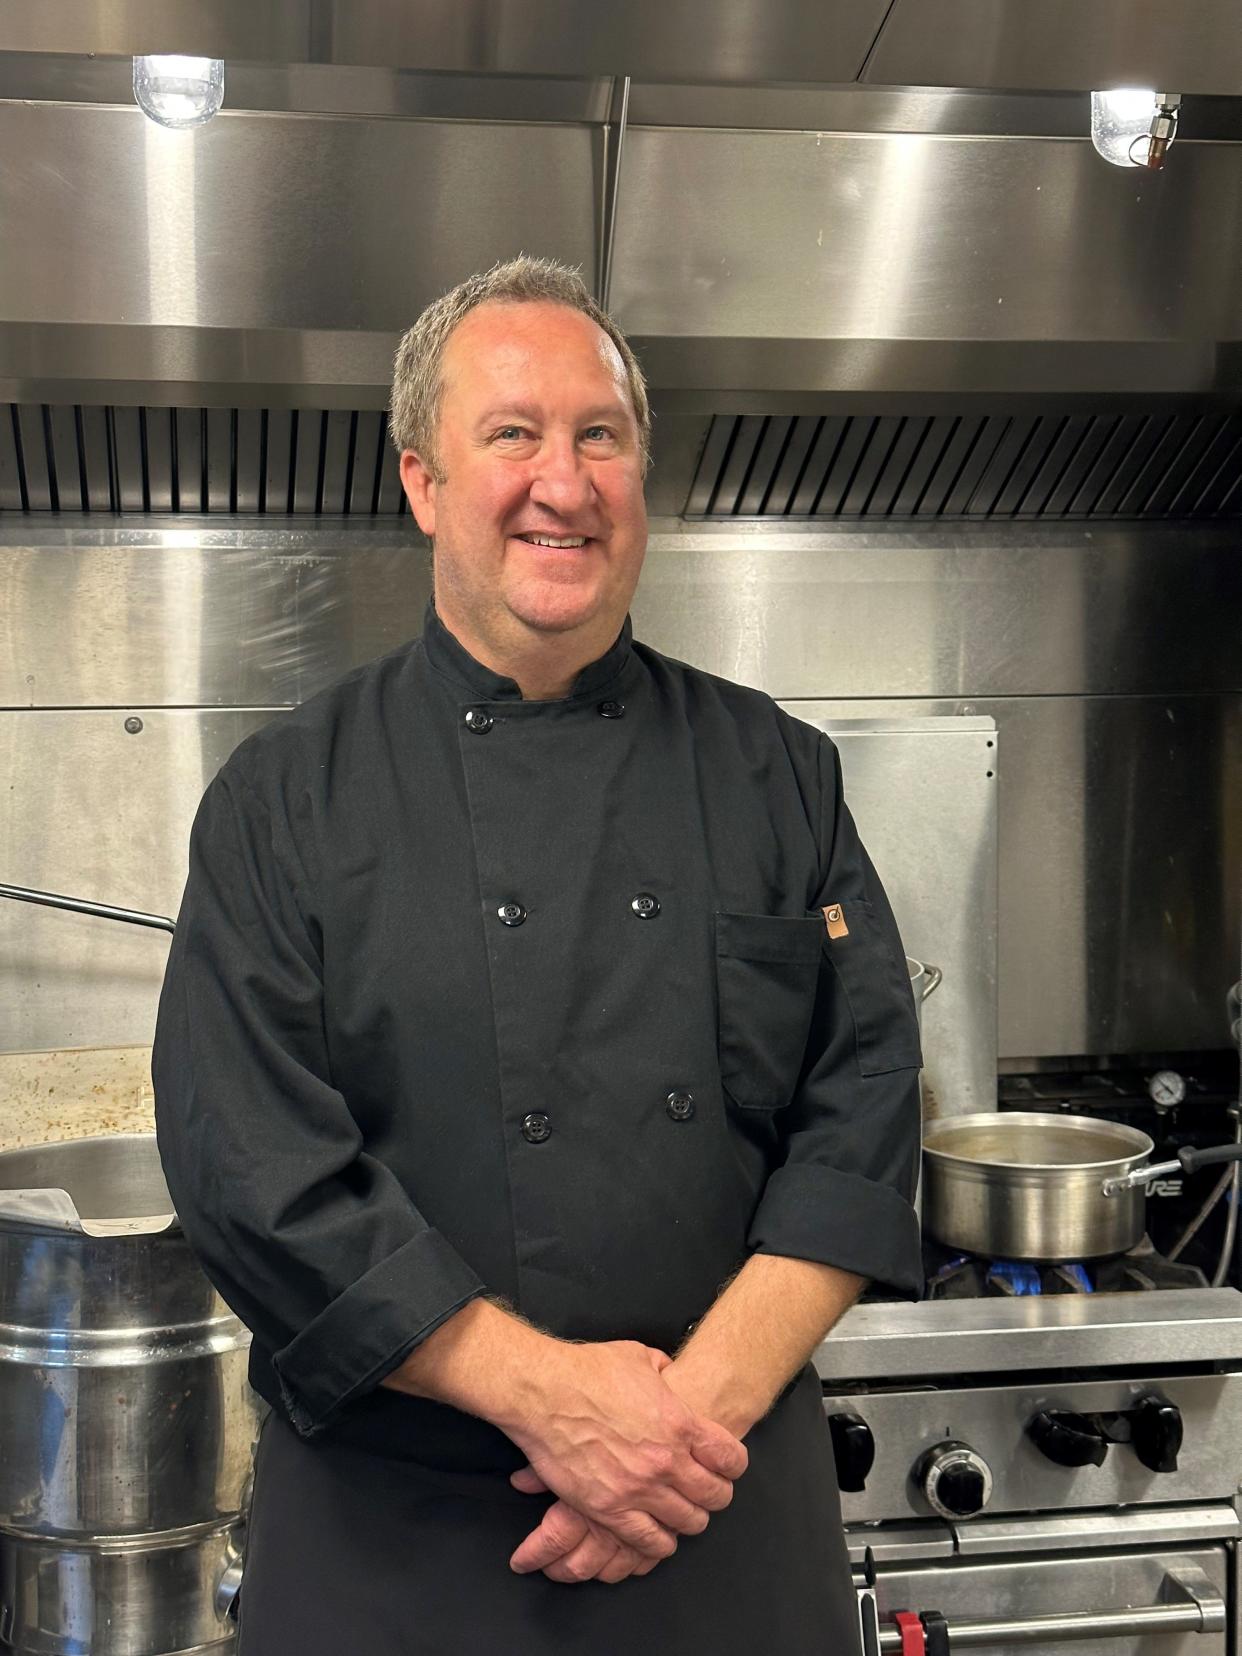 Tag Grandgeorge became the executive chef at Terrace Hill in February. Grandgeorge previously operated Le Jardin in Beaverdale.